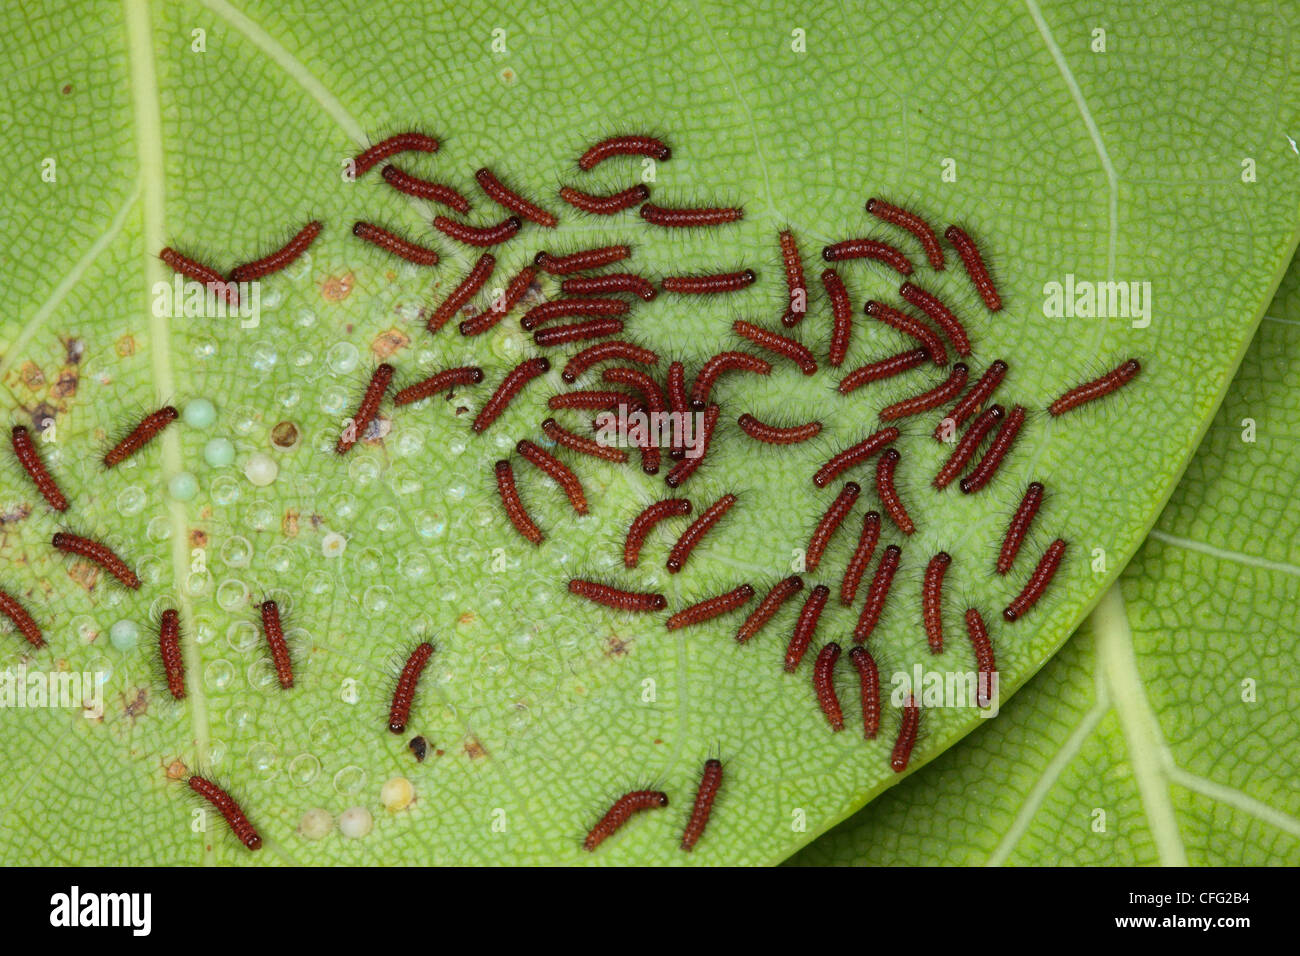 A group of caterpillars assembled near the eggs they hatched from. Stock Photo